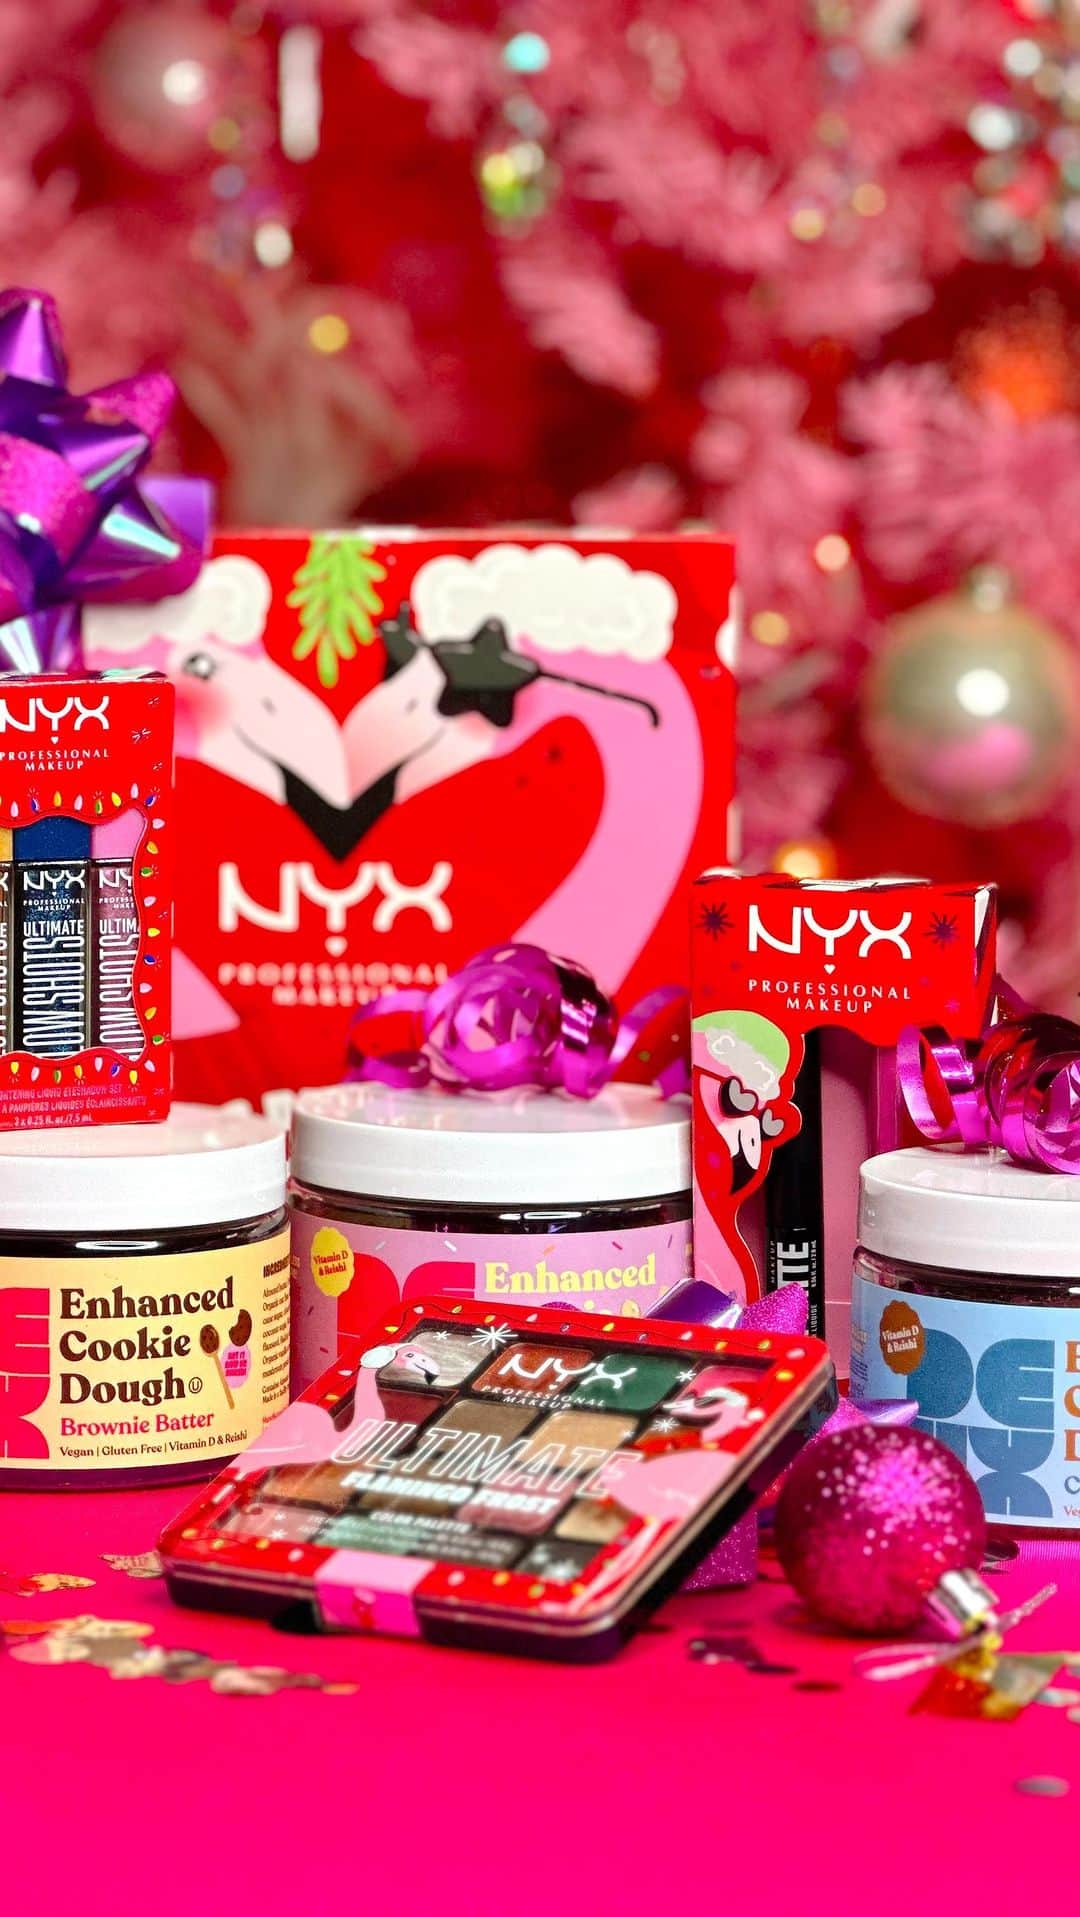 NYX Cosmeticsのインスタグラム：「✨🎁 #GIVEAWAY 🎁✨ @‌nyxcosmetics and @‌eatdeux have partnered up for the SWEETEST GIVEAWAY EVR 🤩🍪💄 all u gotta do is:  💋 FOLLOW @‌nyxcosmetics & @‌eatdeux  💋 COMMENT 🍪  💋 BONUS: COMMENT ON RECENT POSTS  #nyxcosmetics #eatdeux #holiday  Official Rules: US Only. No purchase necessary. You must be 18+ & a legal US resident. Starts at 3:00 PM PST on 12/11/2023 and ends at 11:59 PM PT on 12/14/2023. Odds of winning depend on the total number of entries #nyxcosmetics #nyxprofessionalmakeup #holidaycollection #falalalaland #veganformula #crueltyfree」